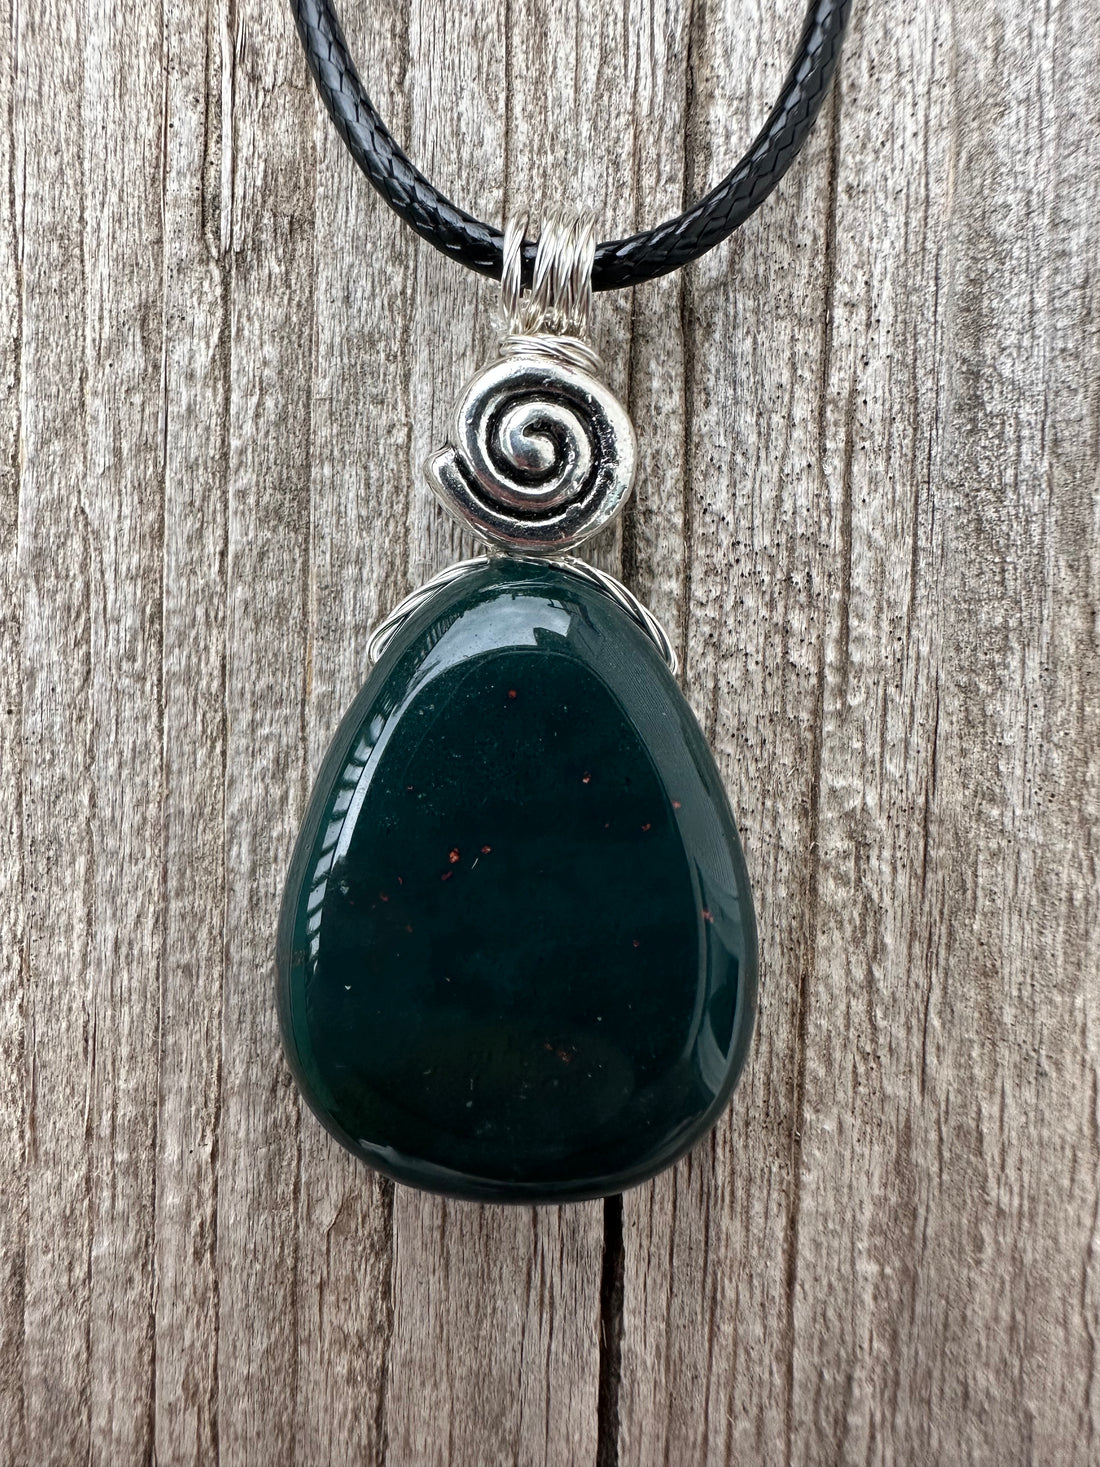 Bloodstone Pendant a Mystical Stone Bringing Understanding, Calm and Courage. Pewter Accent Piece